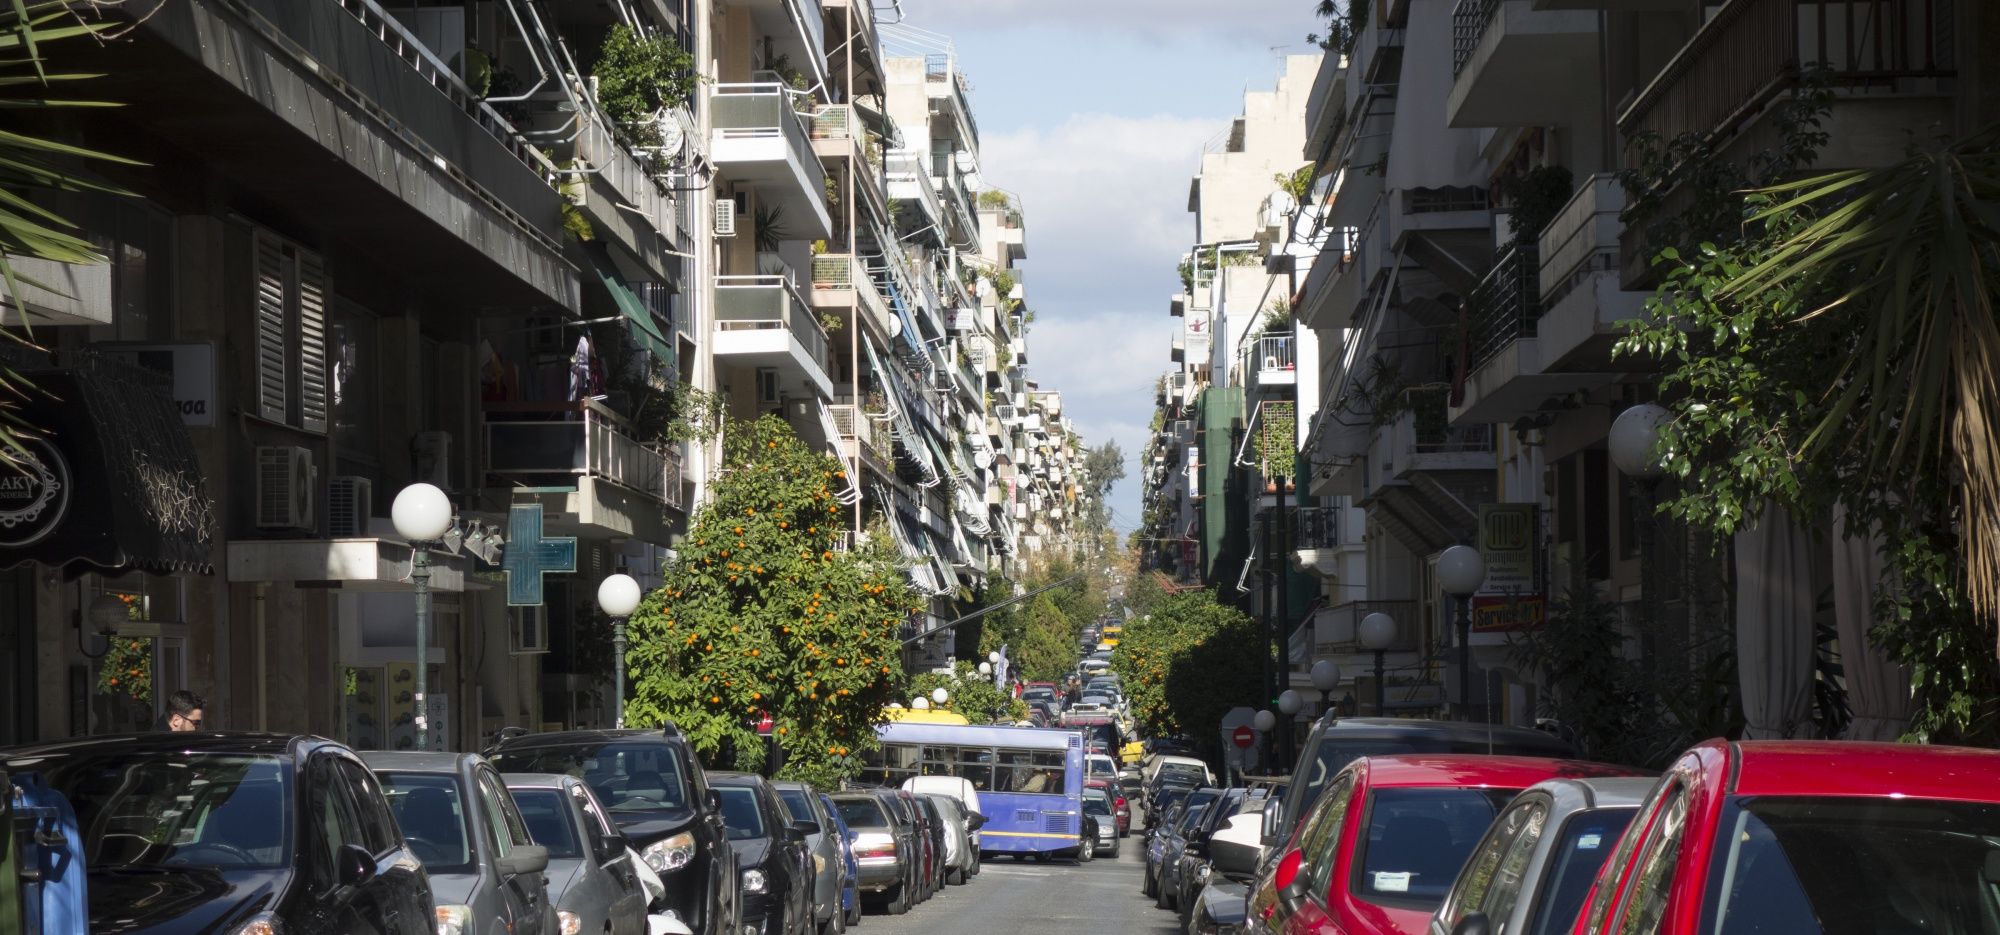 How Athens’ modernist polikatoika came to define its mixed social fabric